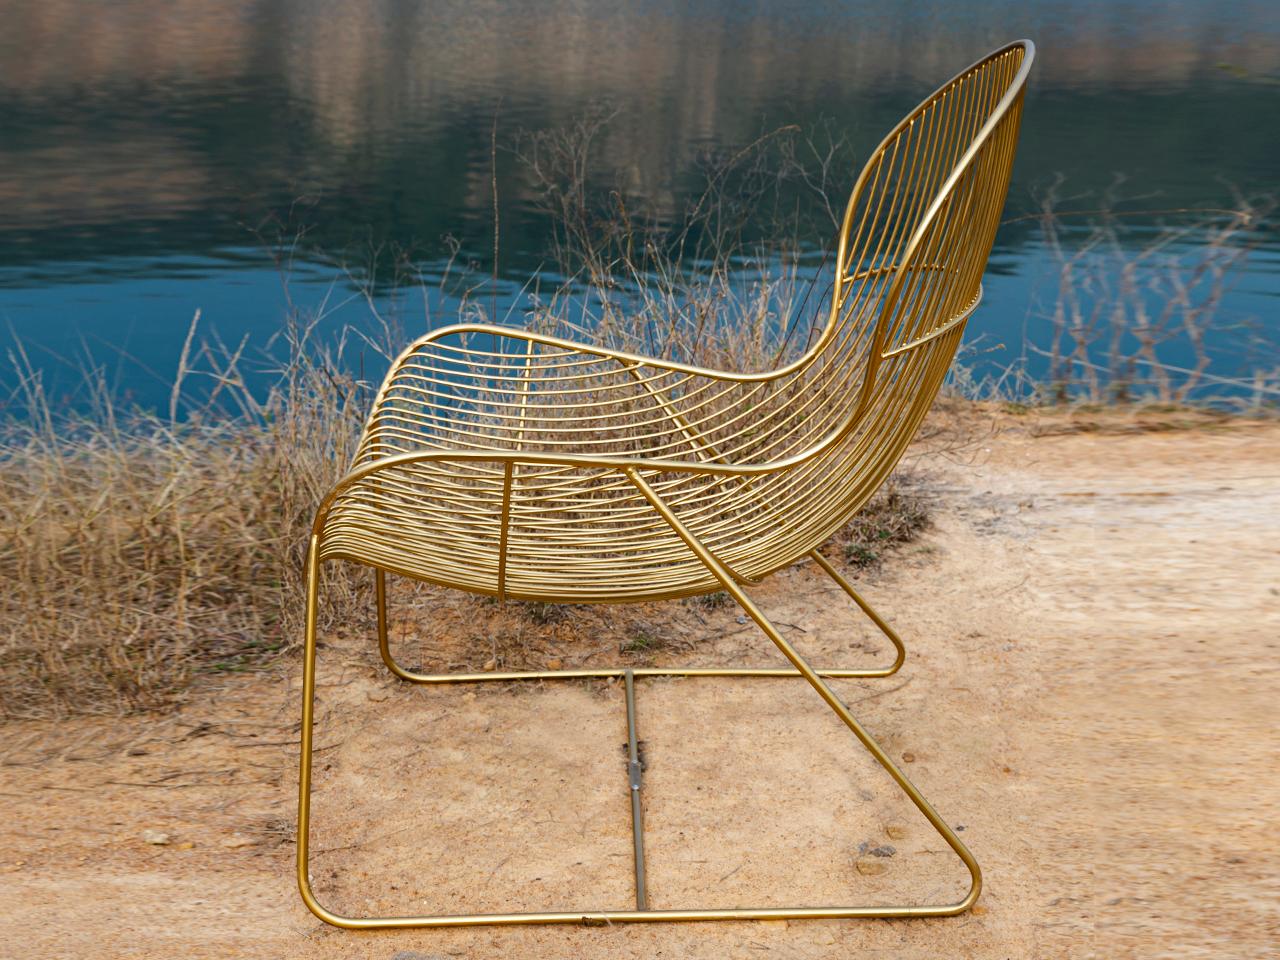 For your days of endless lounging, whether with a book or a cocktail (make your pick), the Balena lounger adds that extra comfort to your guilty pleasures. Handcrafted with intricate wiring, this lounger spells comfort in every inch of its design.